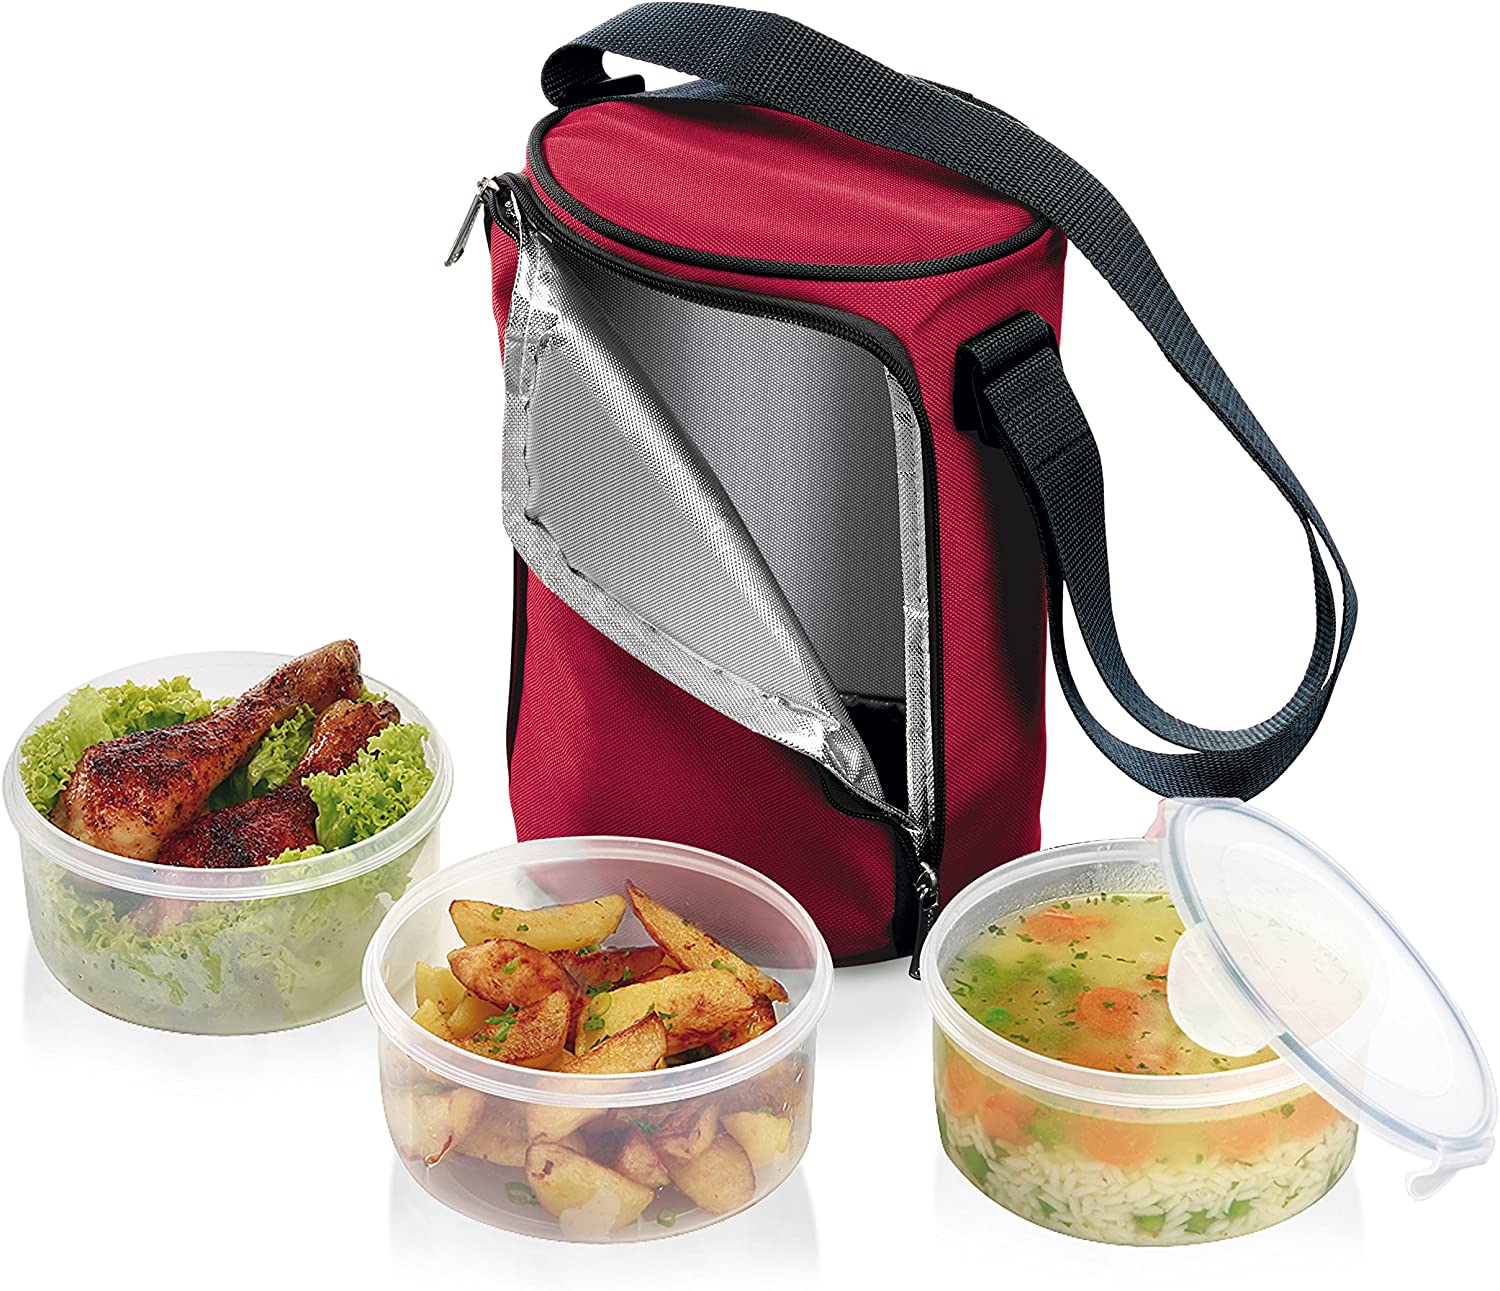 Tescoma Pocket TERMICA ISOLANTE with 3 Containers 1.5 L